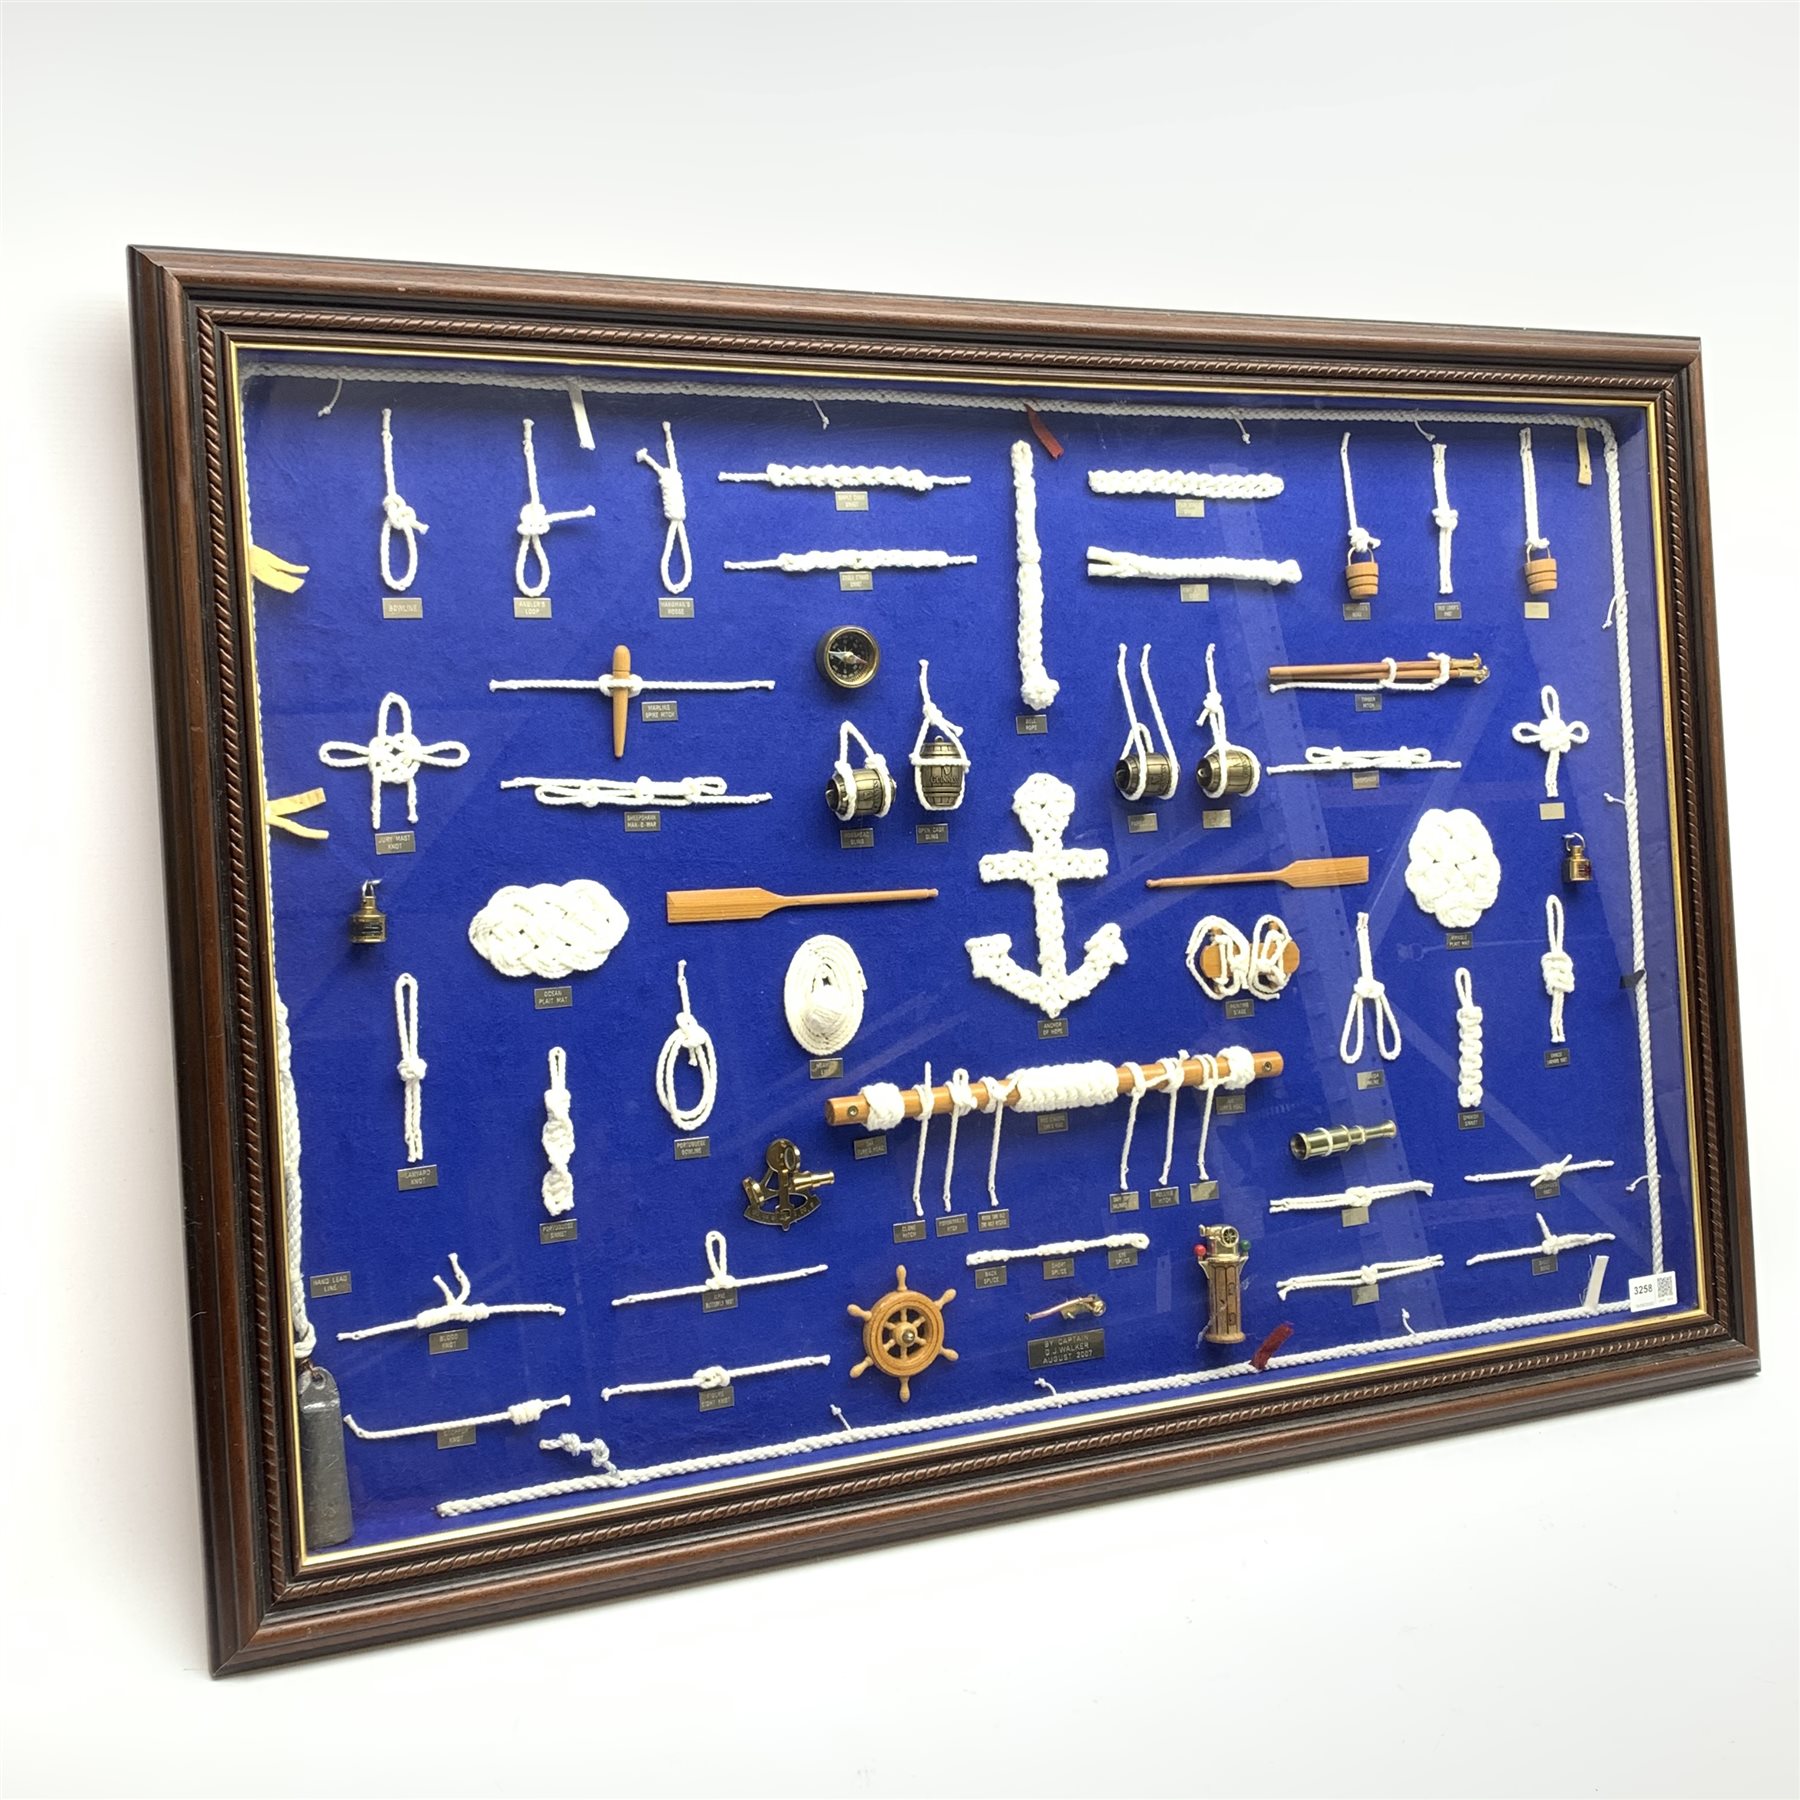 Large framed knot board, including miniature Binnacle, ships wheel and sextant, by Captain D.J.Walk